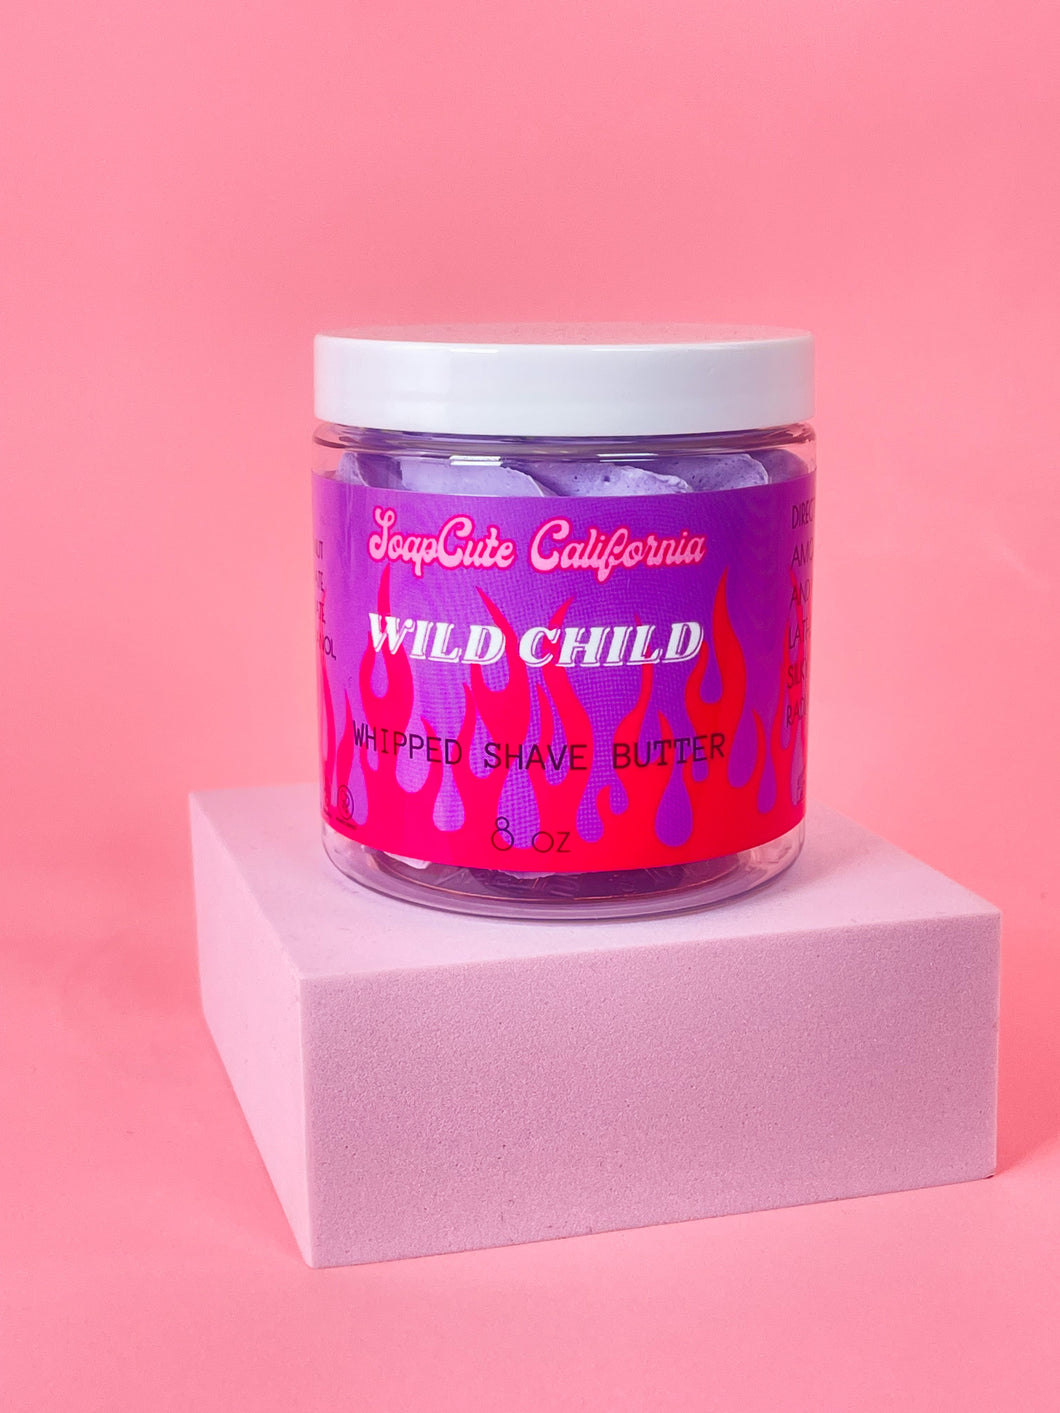 Wild Child Whipped Shave Butter